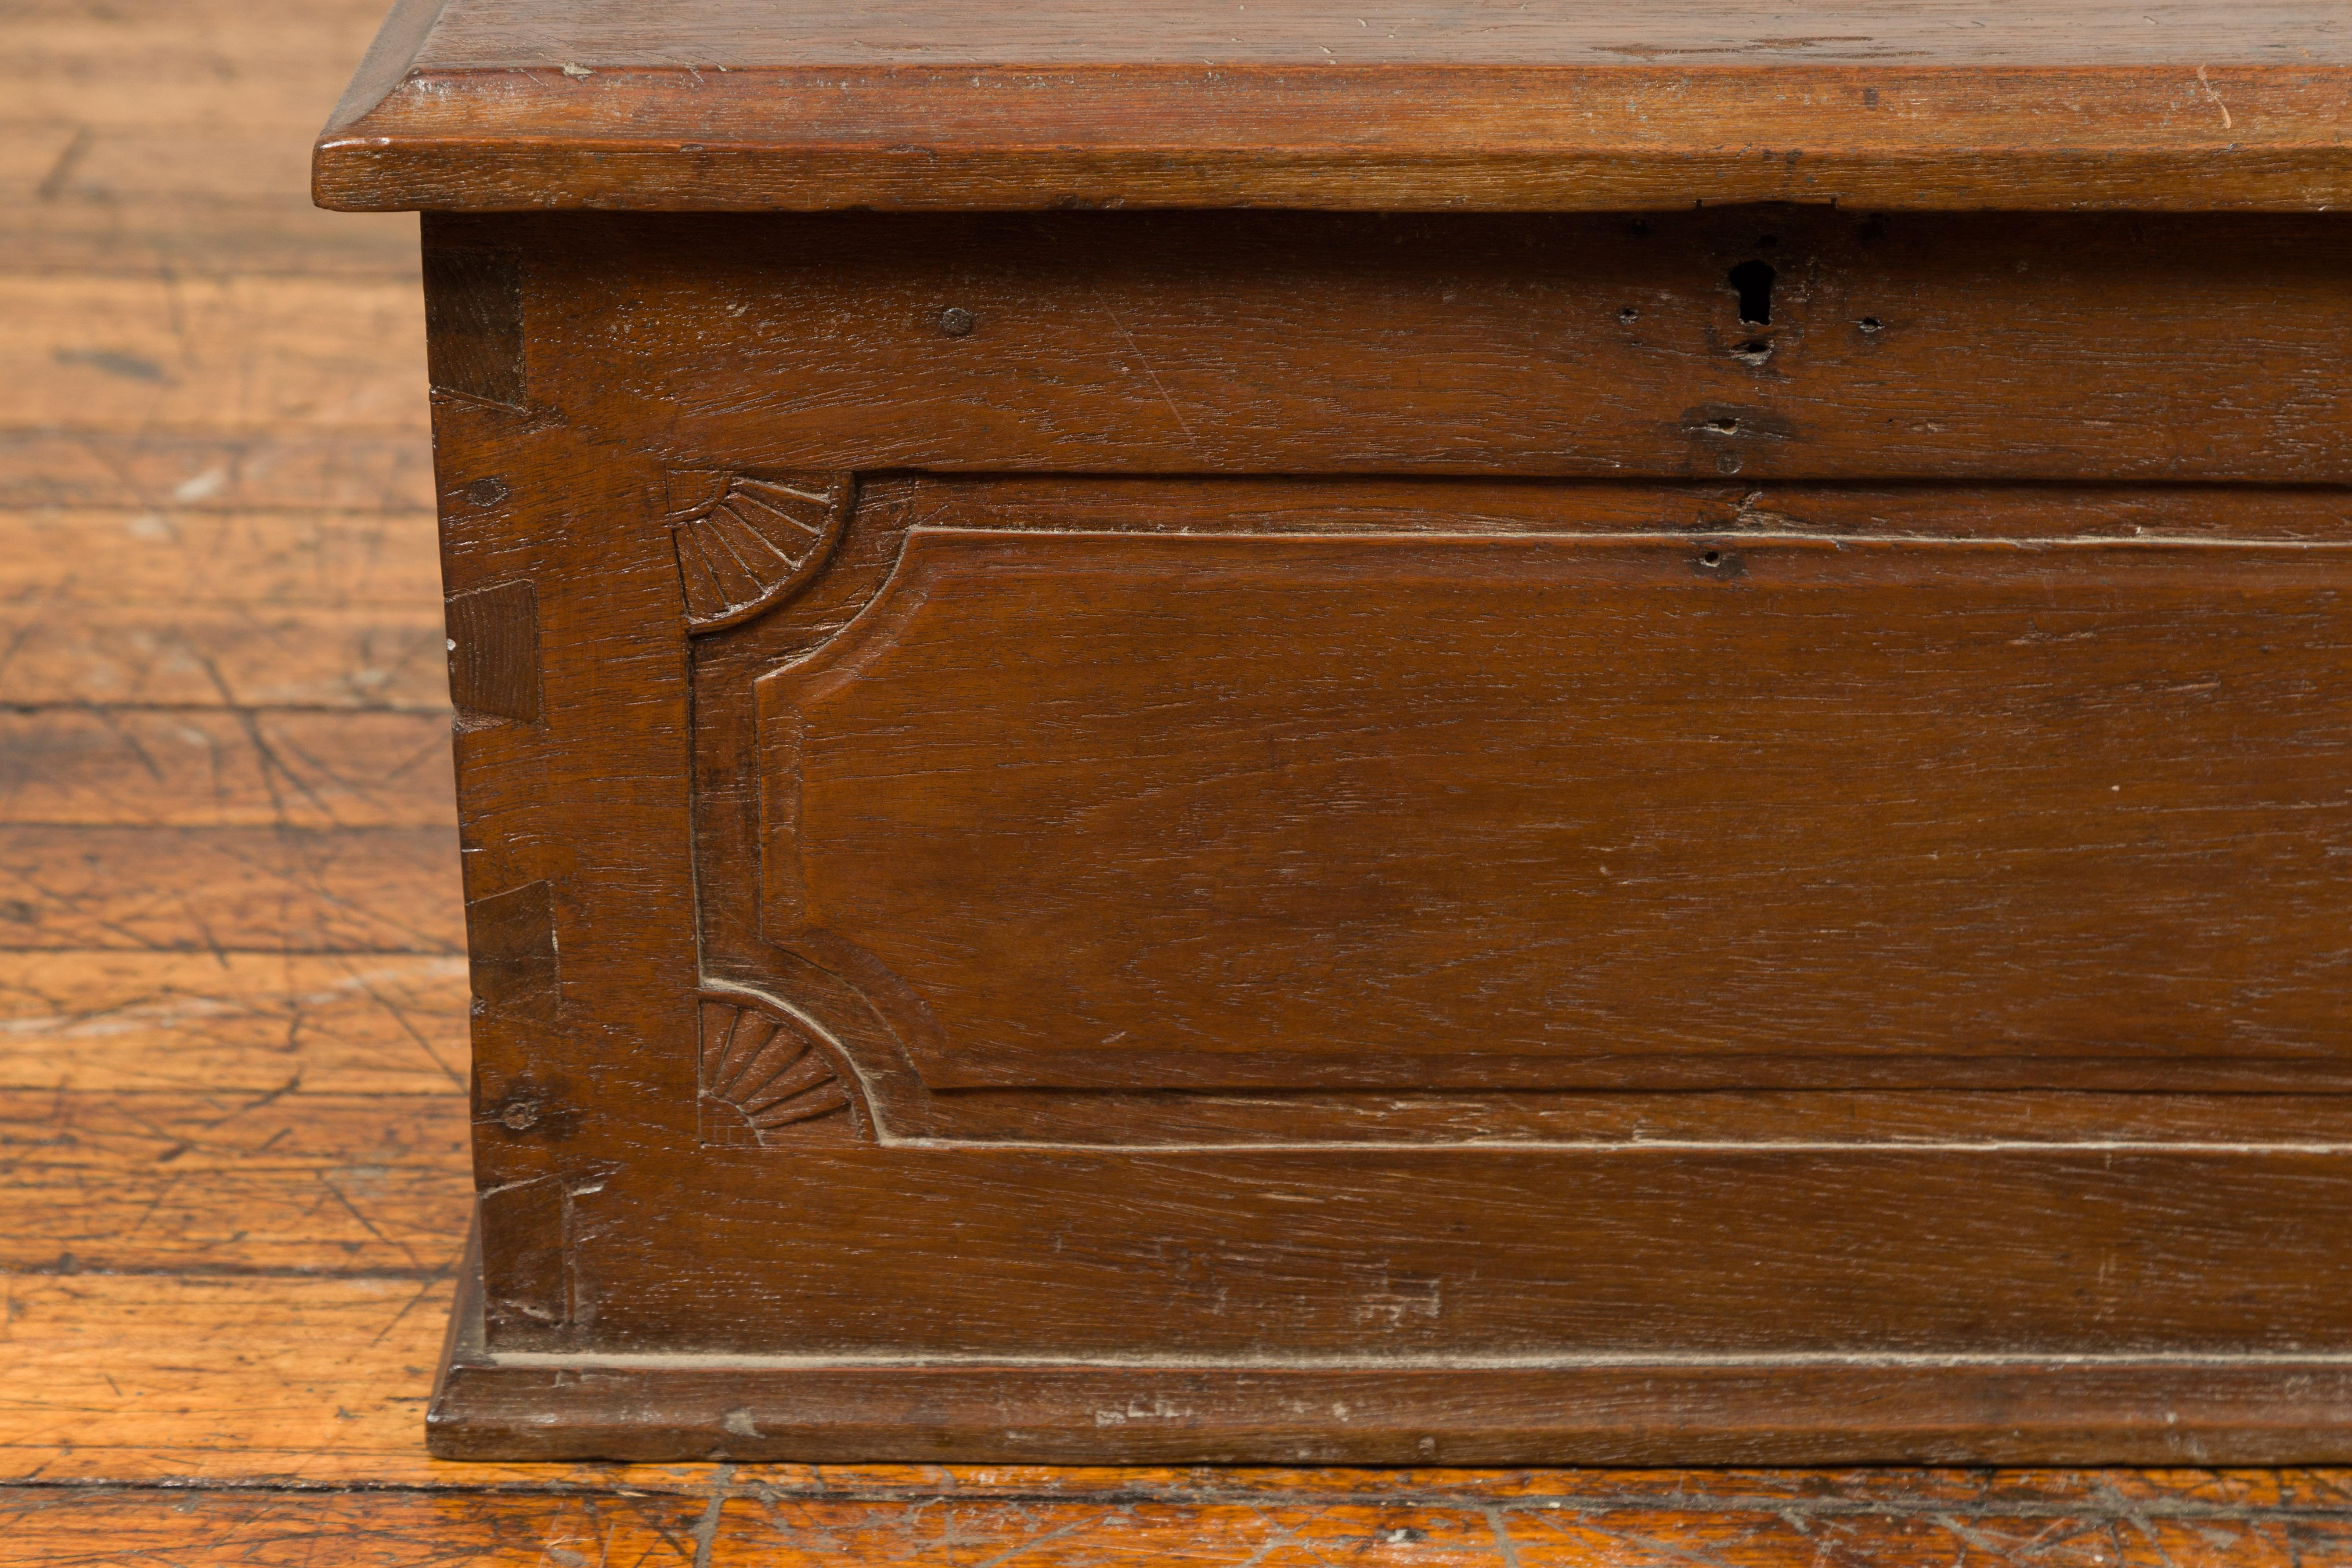 Indonesian 19th Century Dovetailed Wood Treasure Chest from Sumatra with Carved Fan Motifs